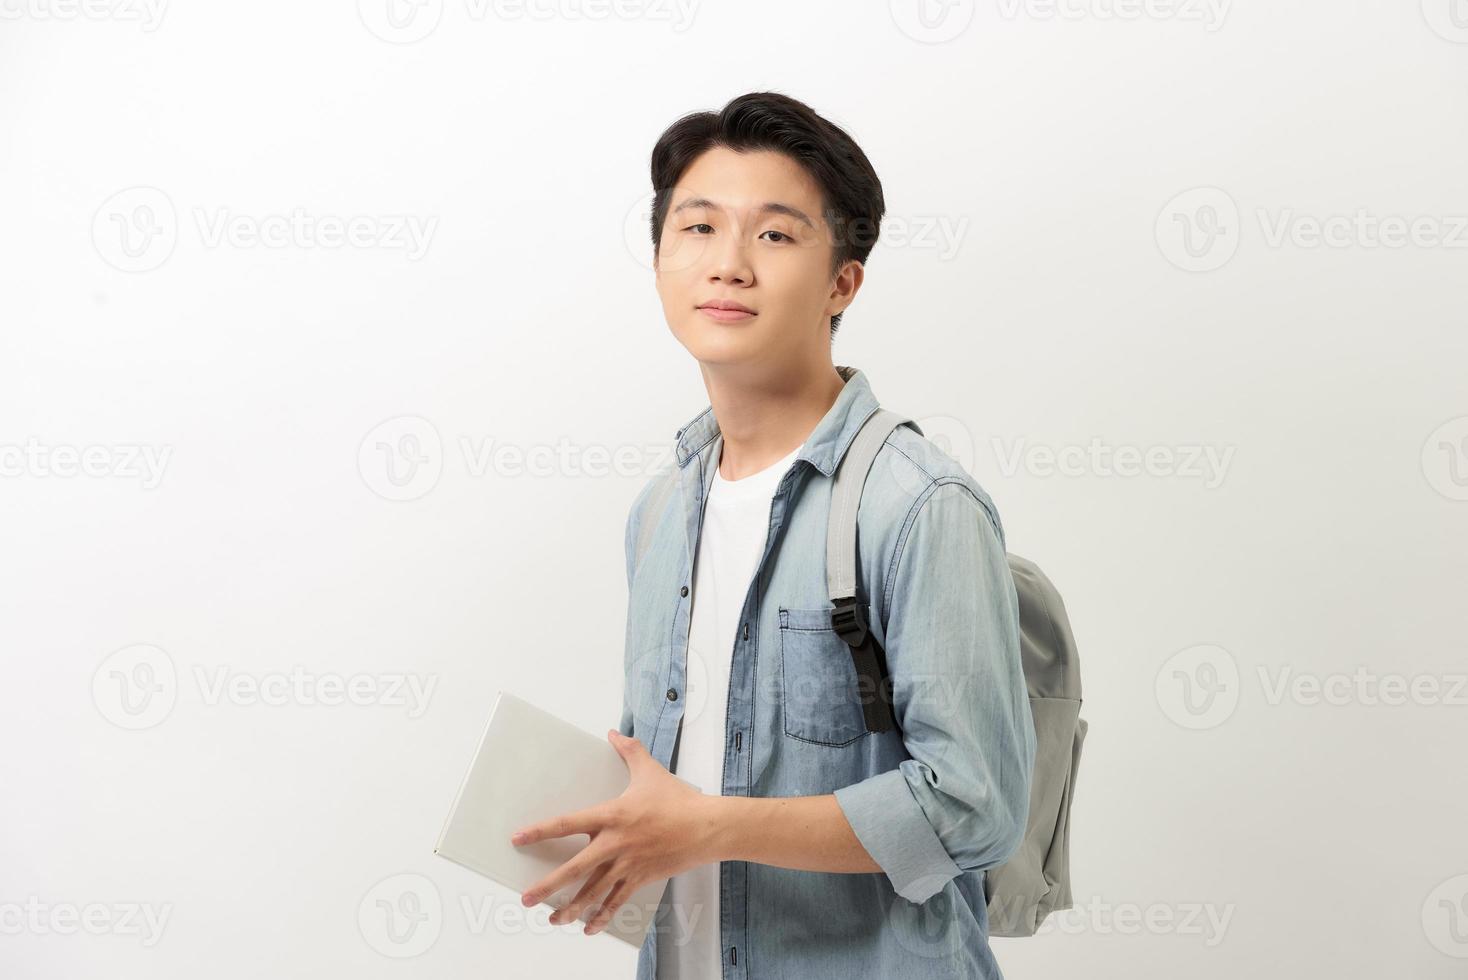 Portrait of smiling young college student with books and backpack against white background photo